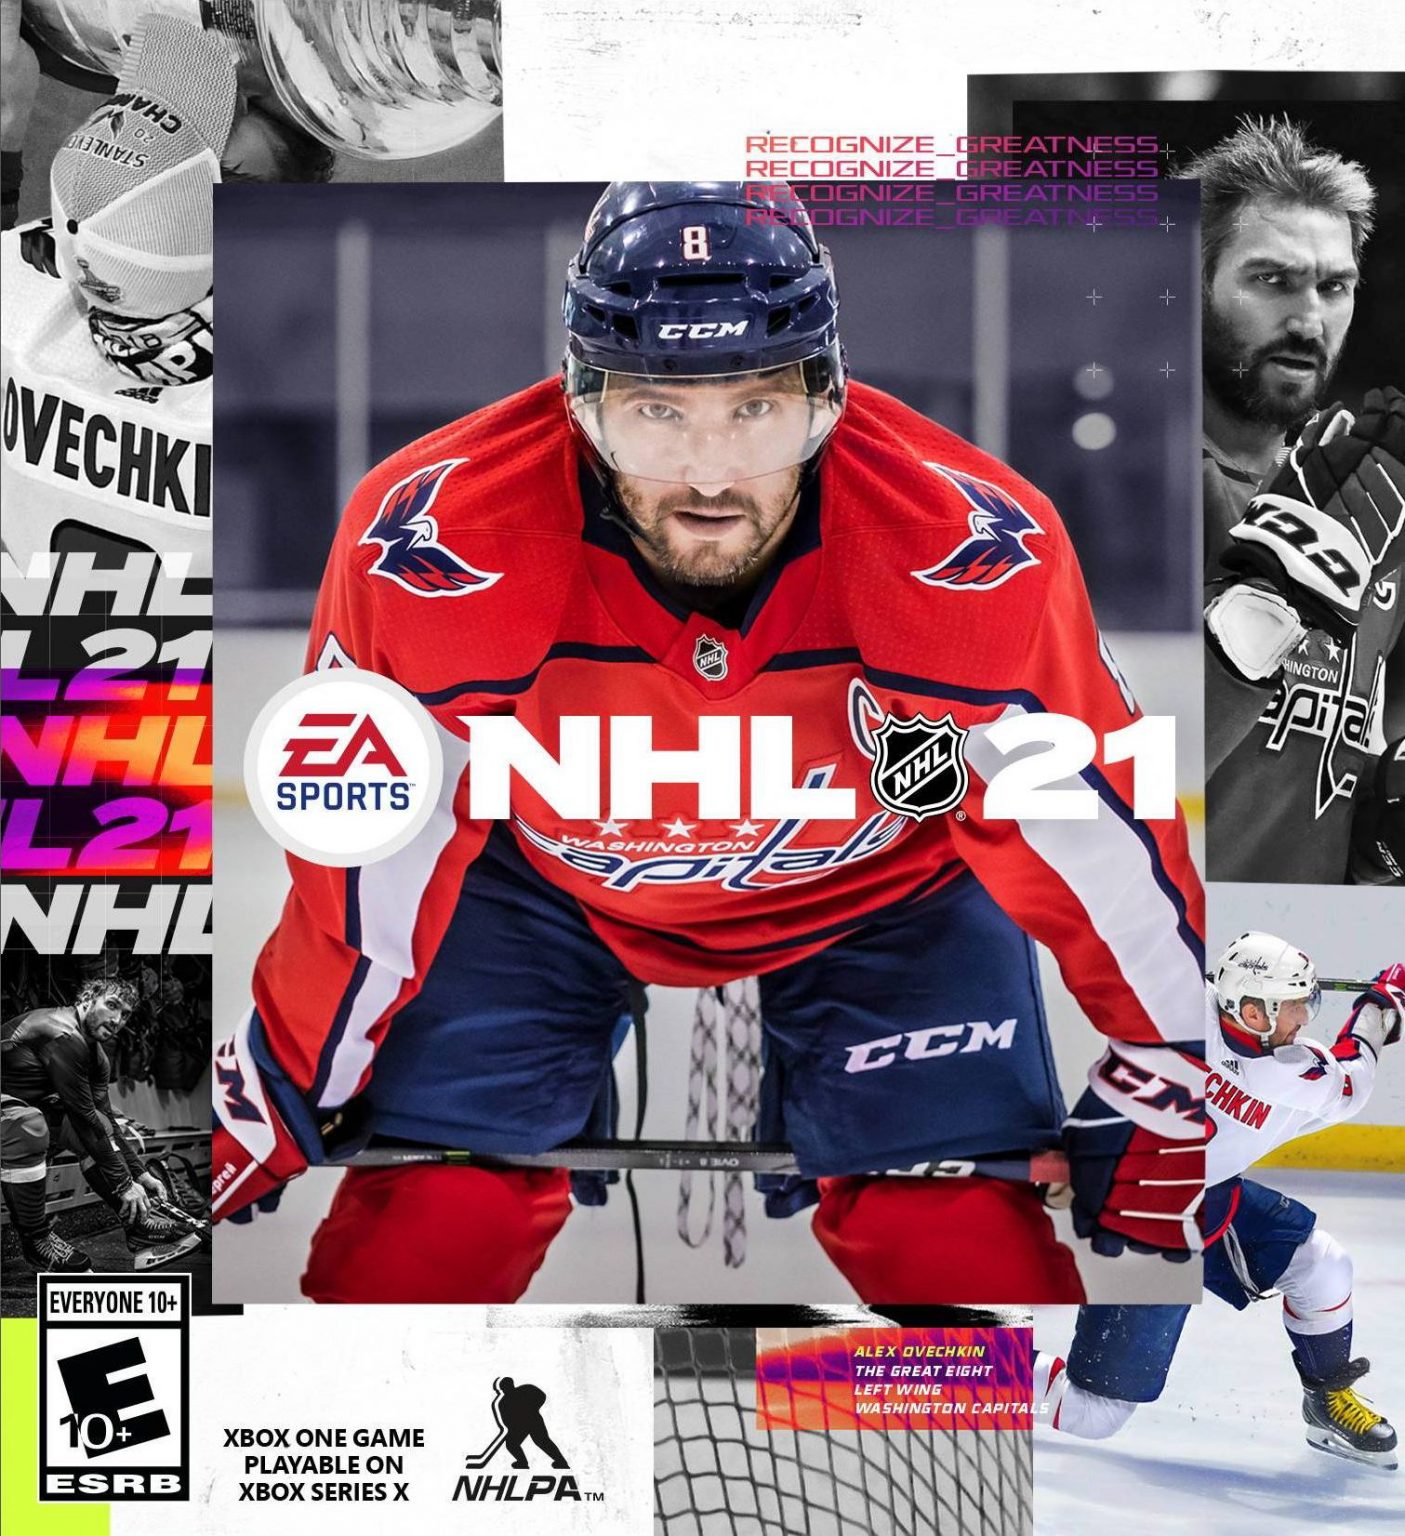 download free nhl 21 ps5